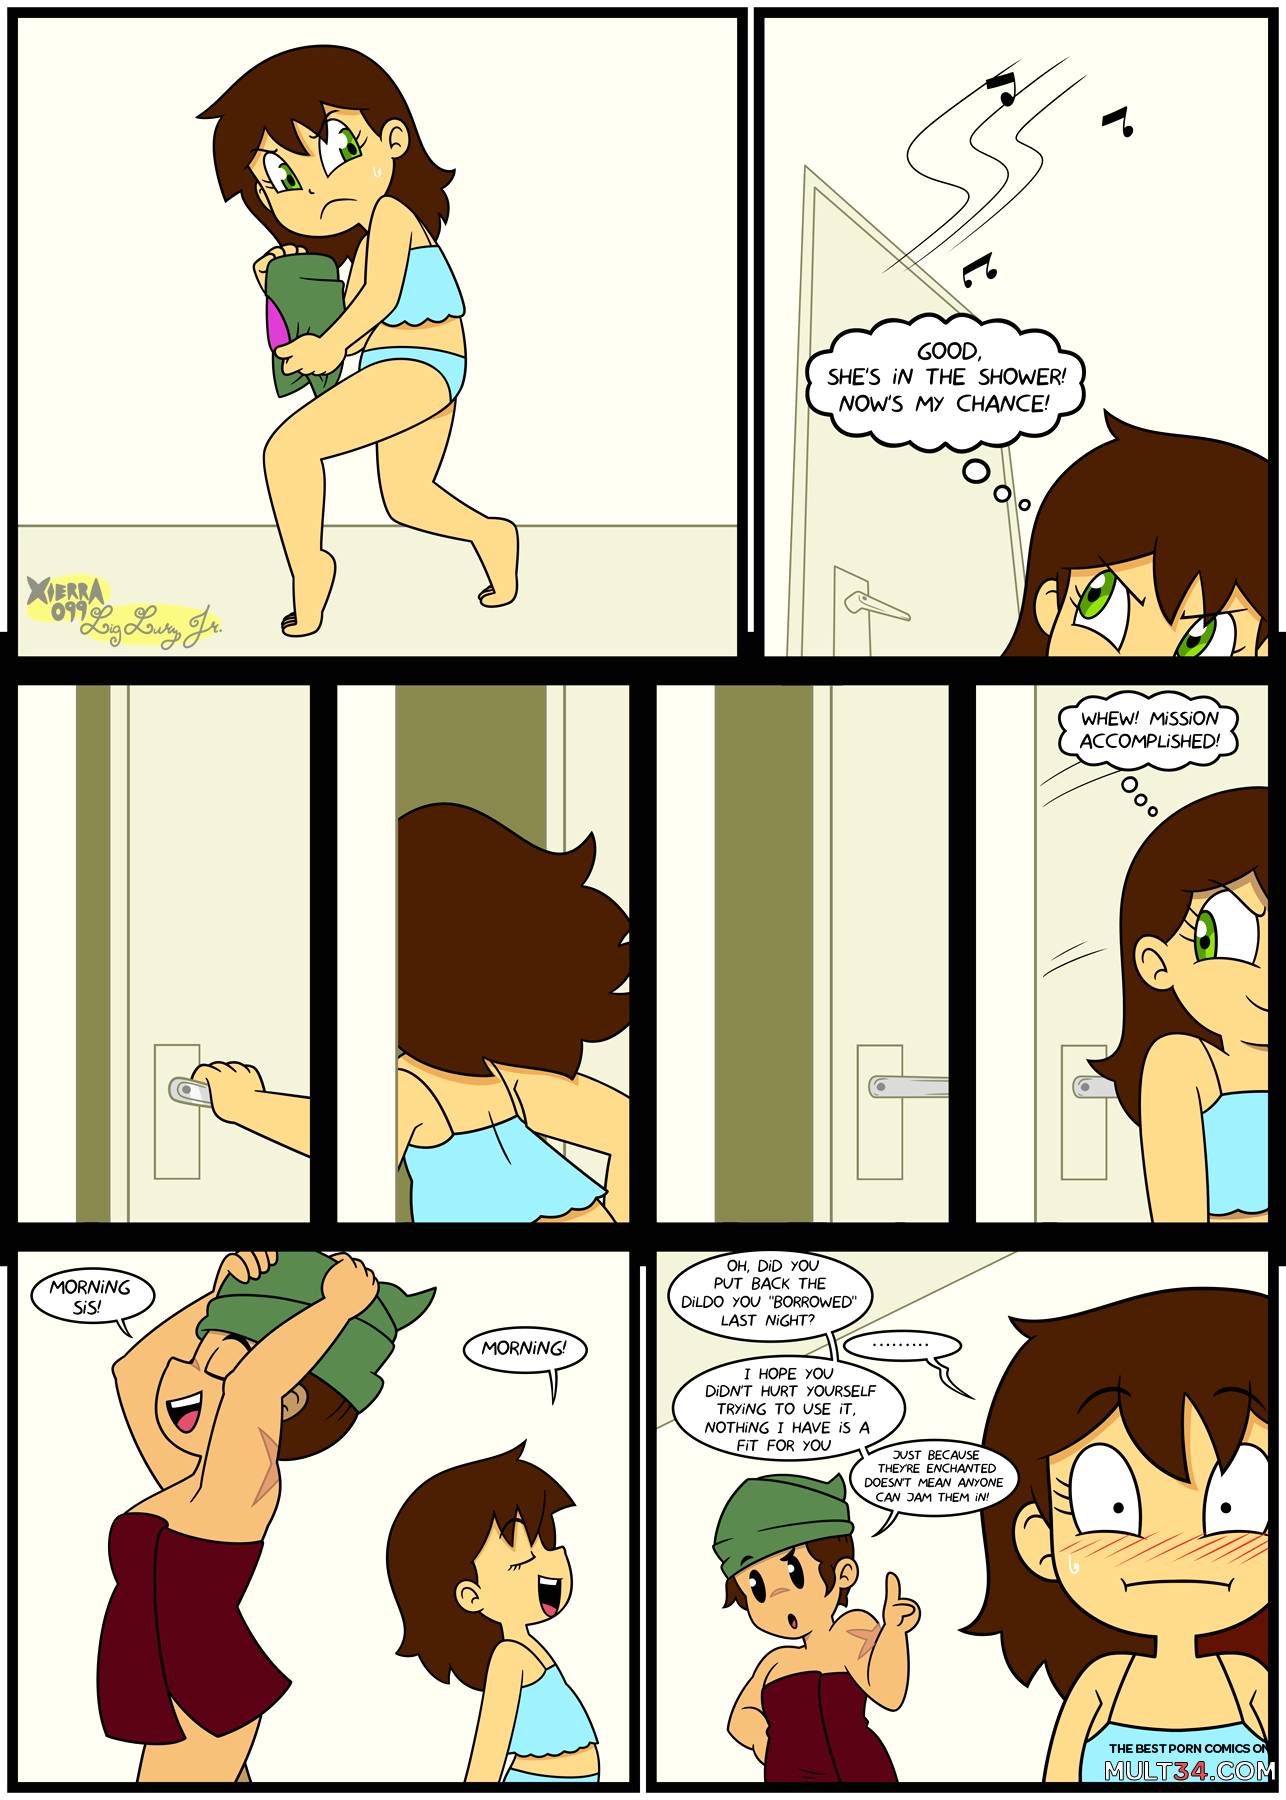 St. Heretic's Academia page 3